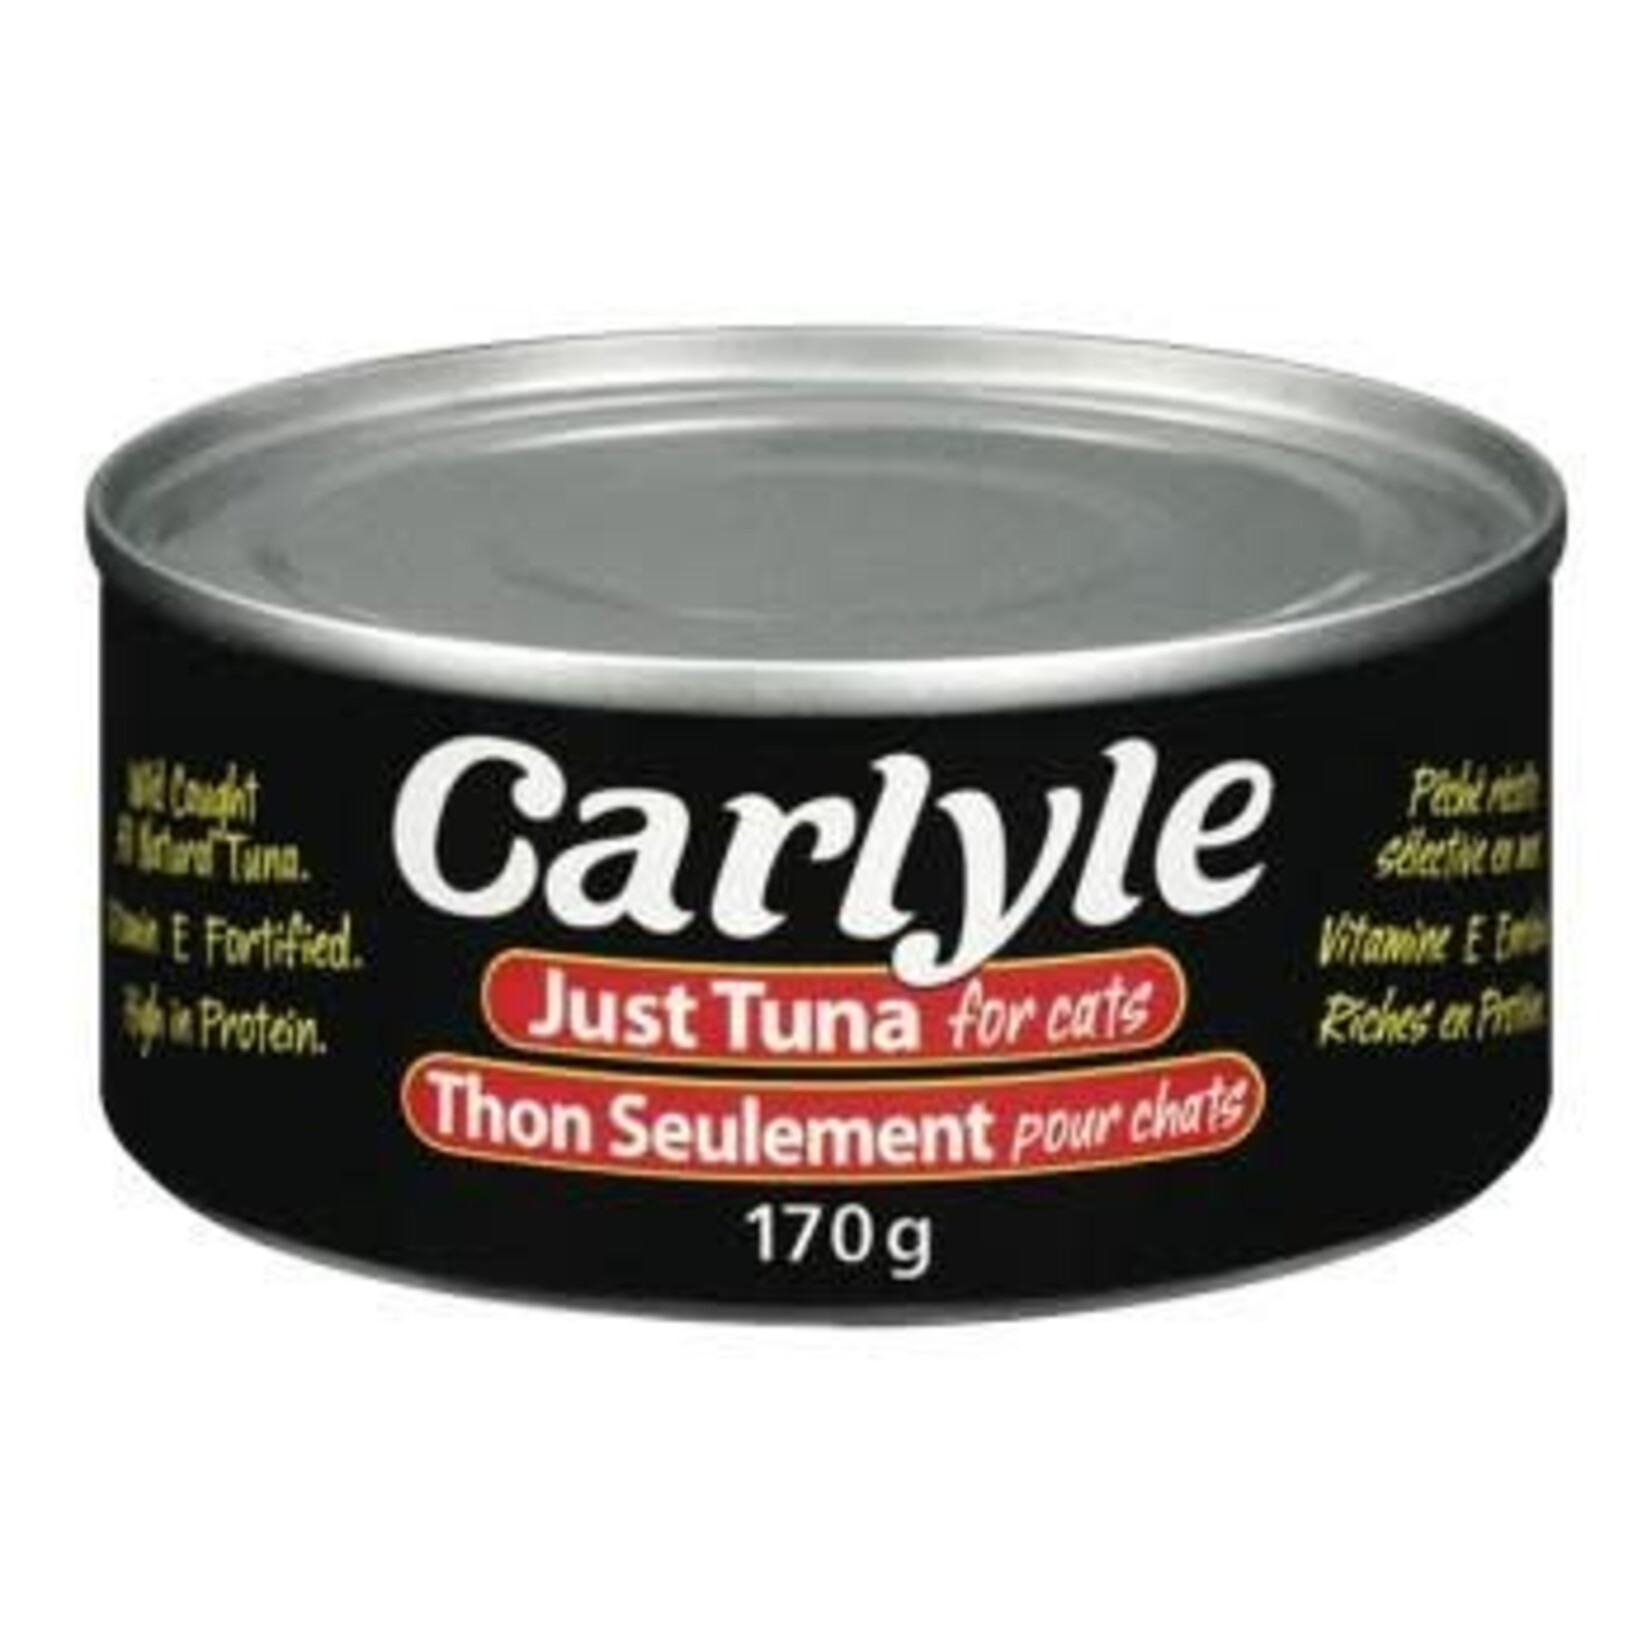 Carlyle - Tuna for Cats